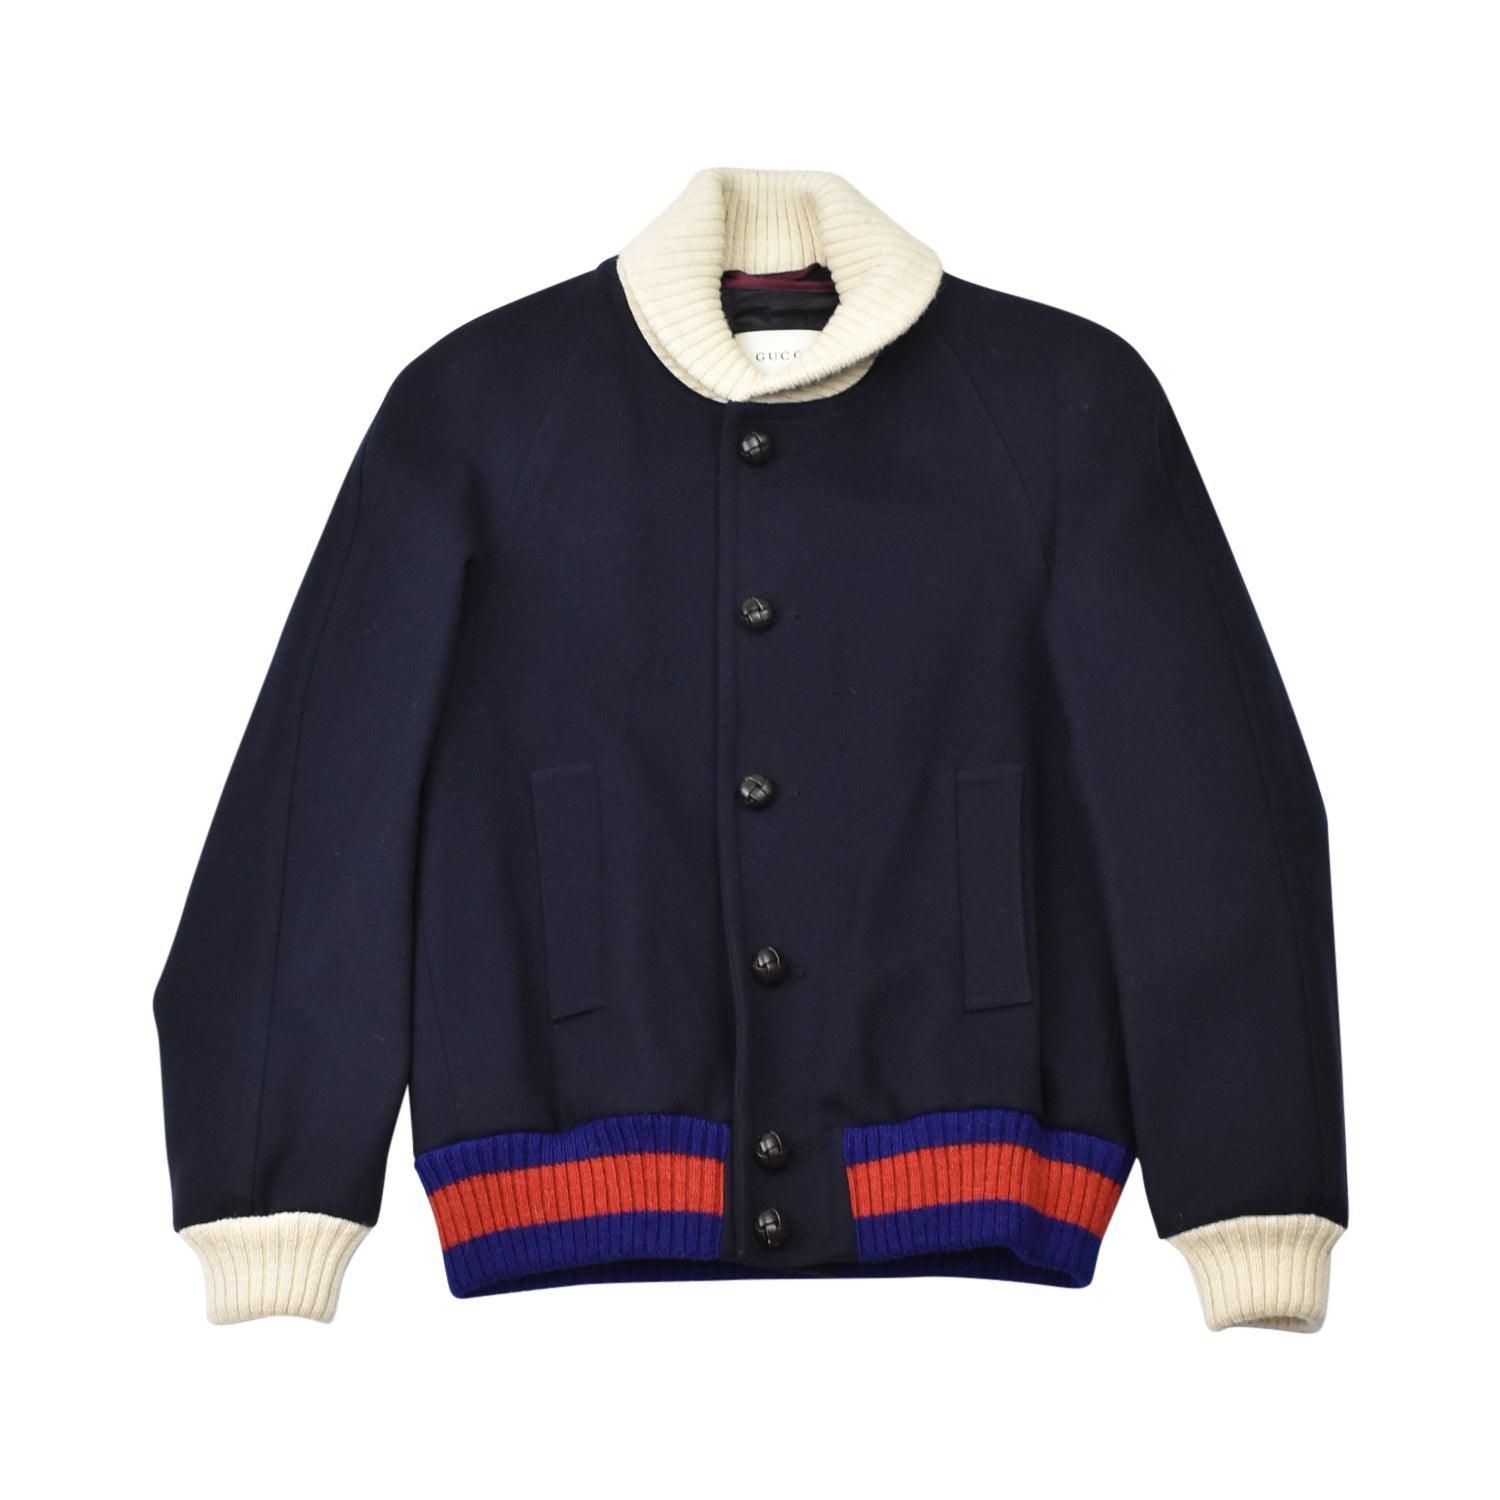 Gucci Bomber Jacket - Men's 50 - Fashionably Yours